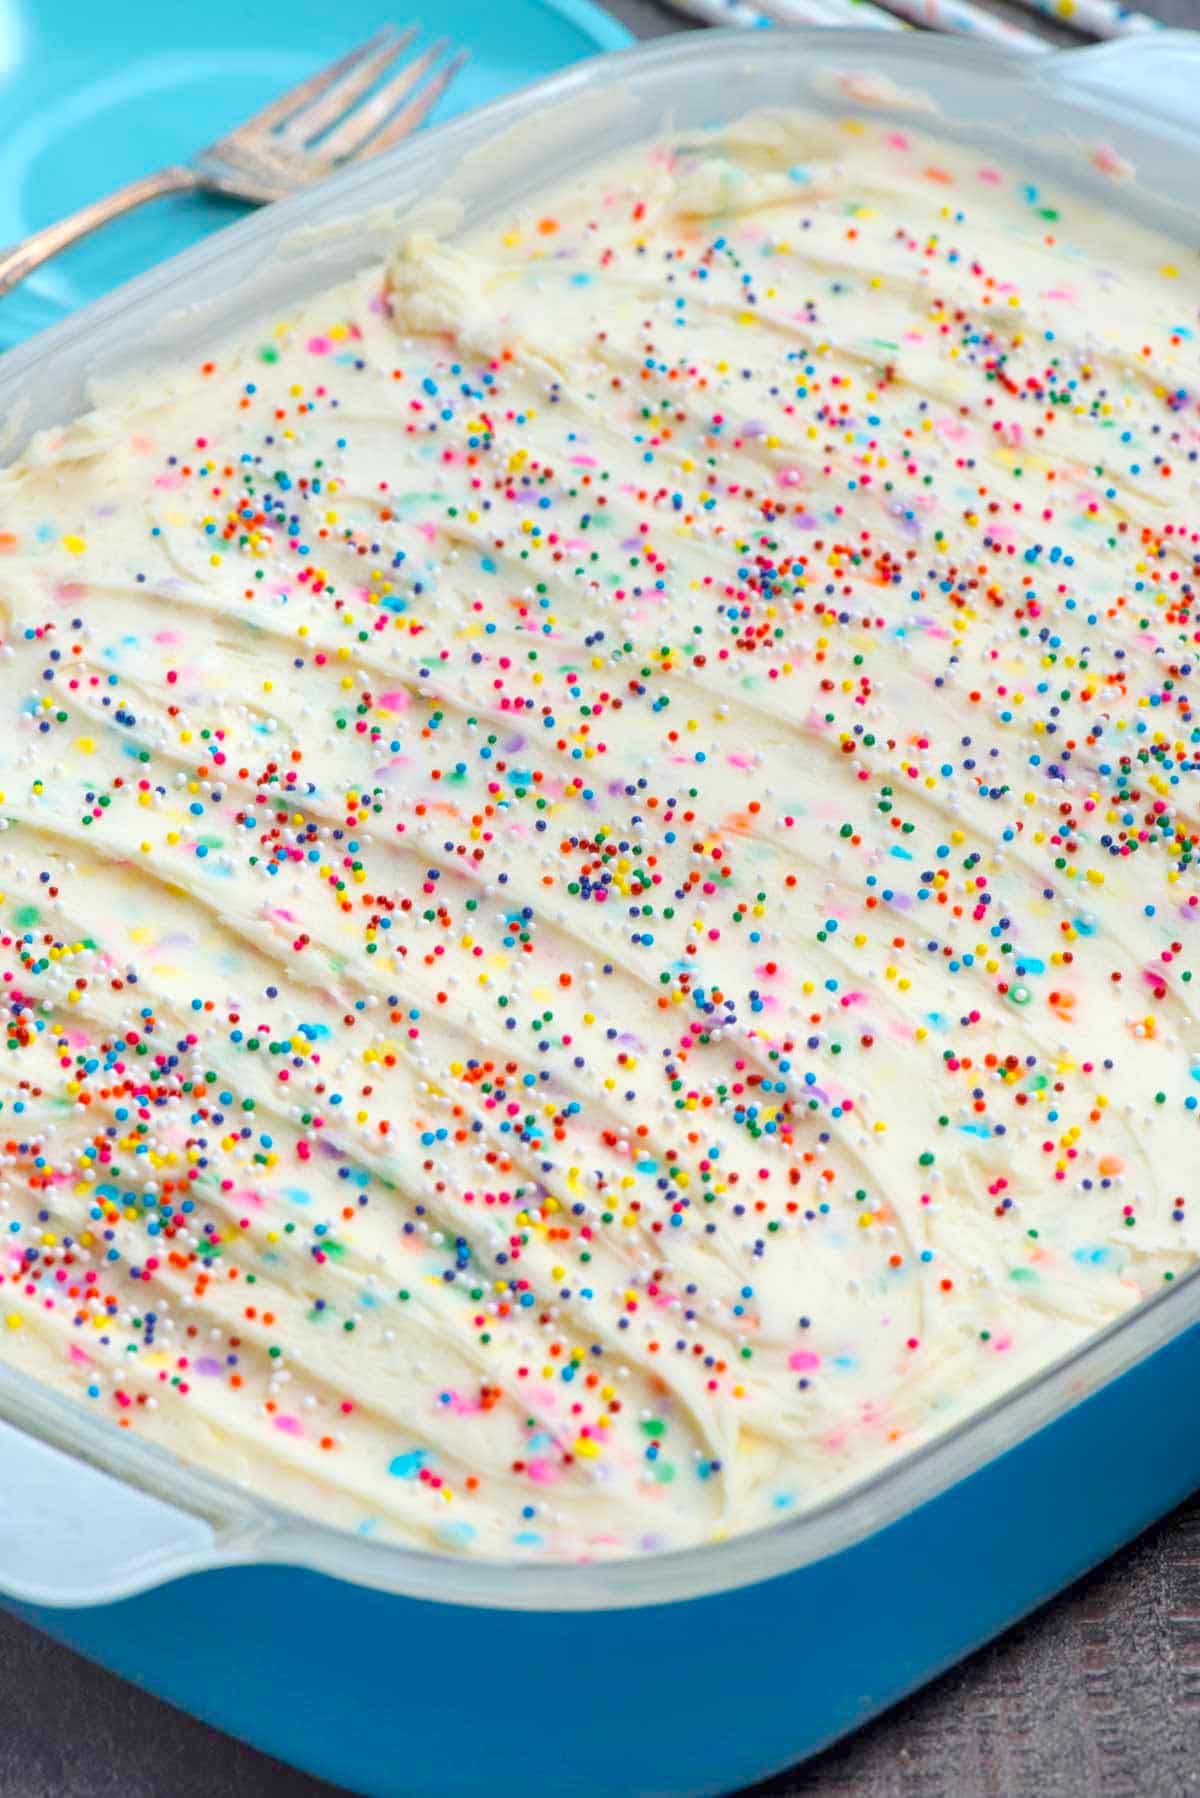 Homemade funfetti cake in a cake pan with vanilla frosting and rainbow sprinkles